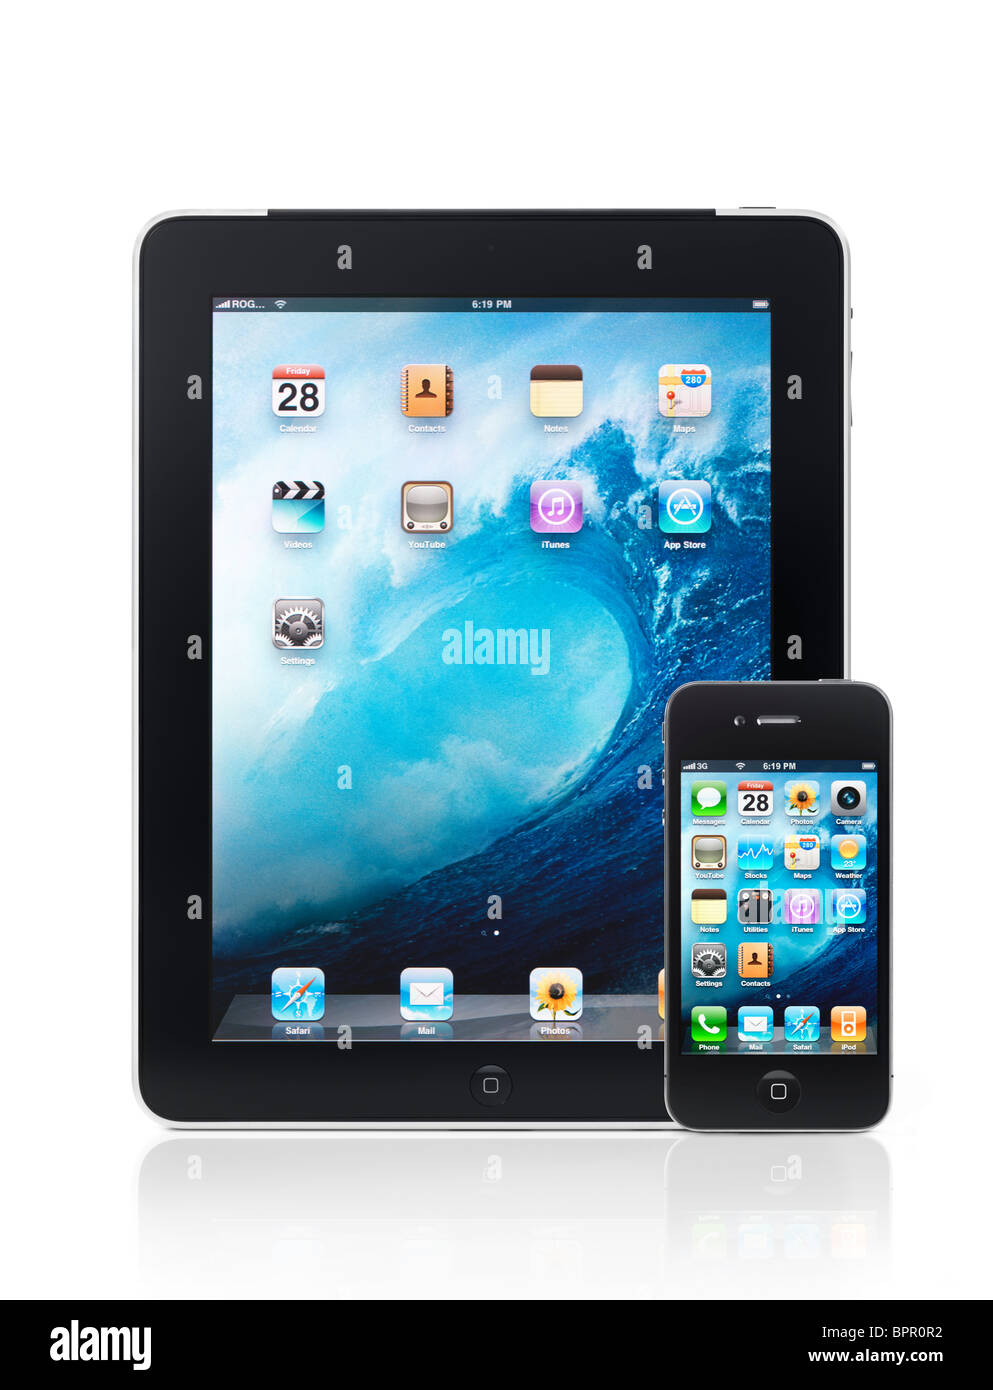 Apple iPad 3G tablet computer and iPhone 4 smartphone with desktop icons on their displays isolated on white background. HQ Stock Photo